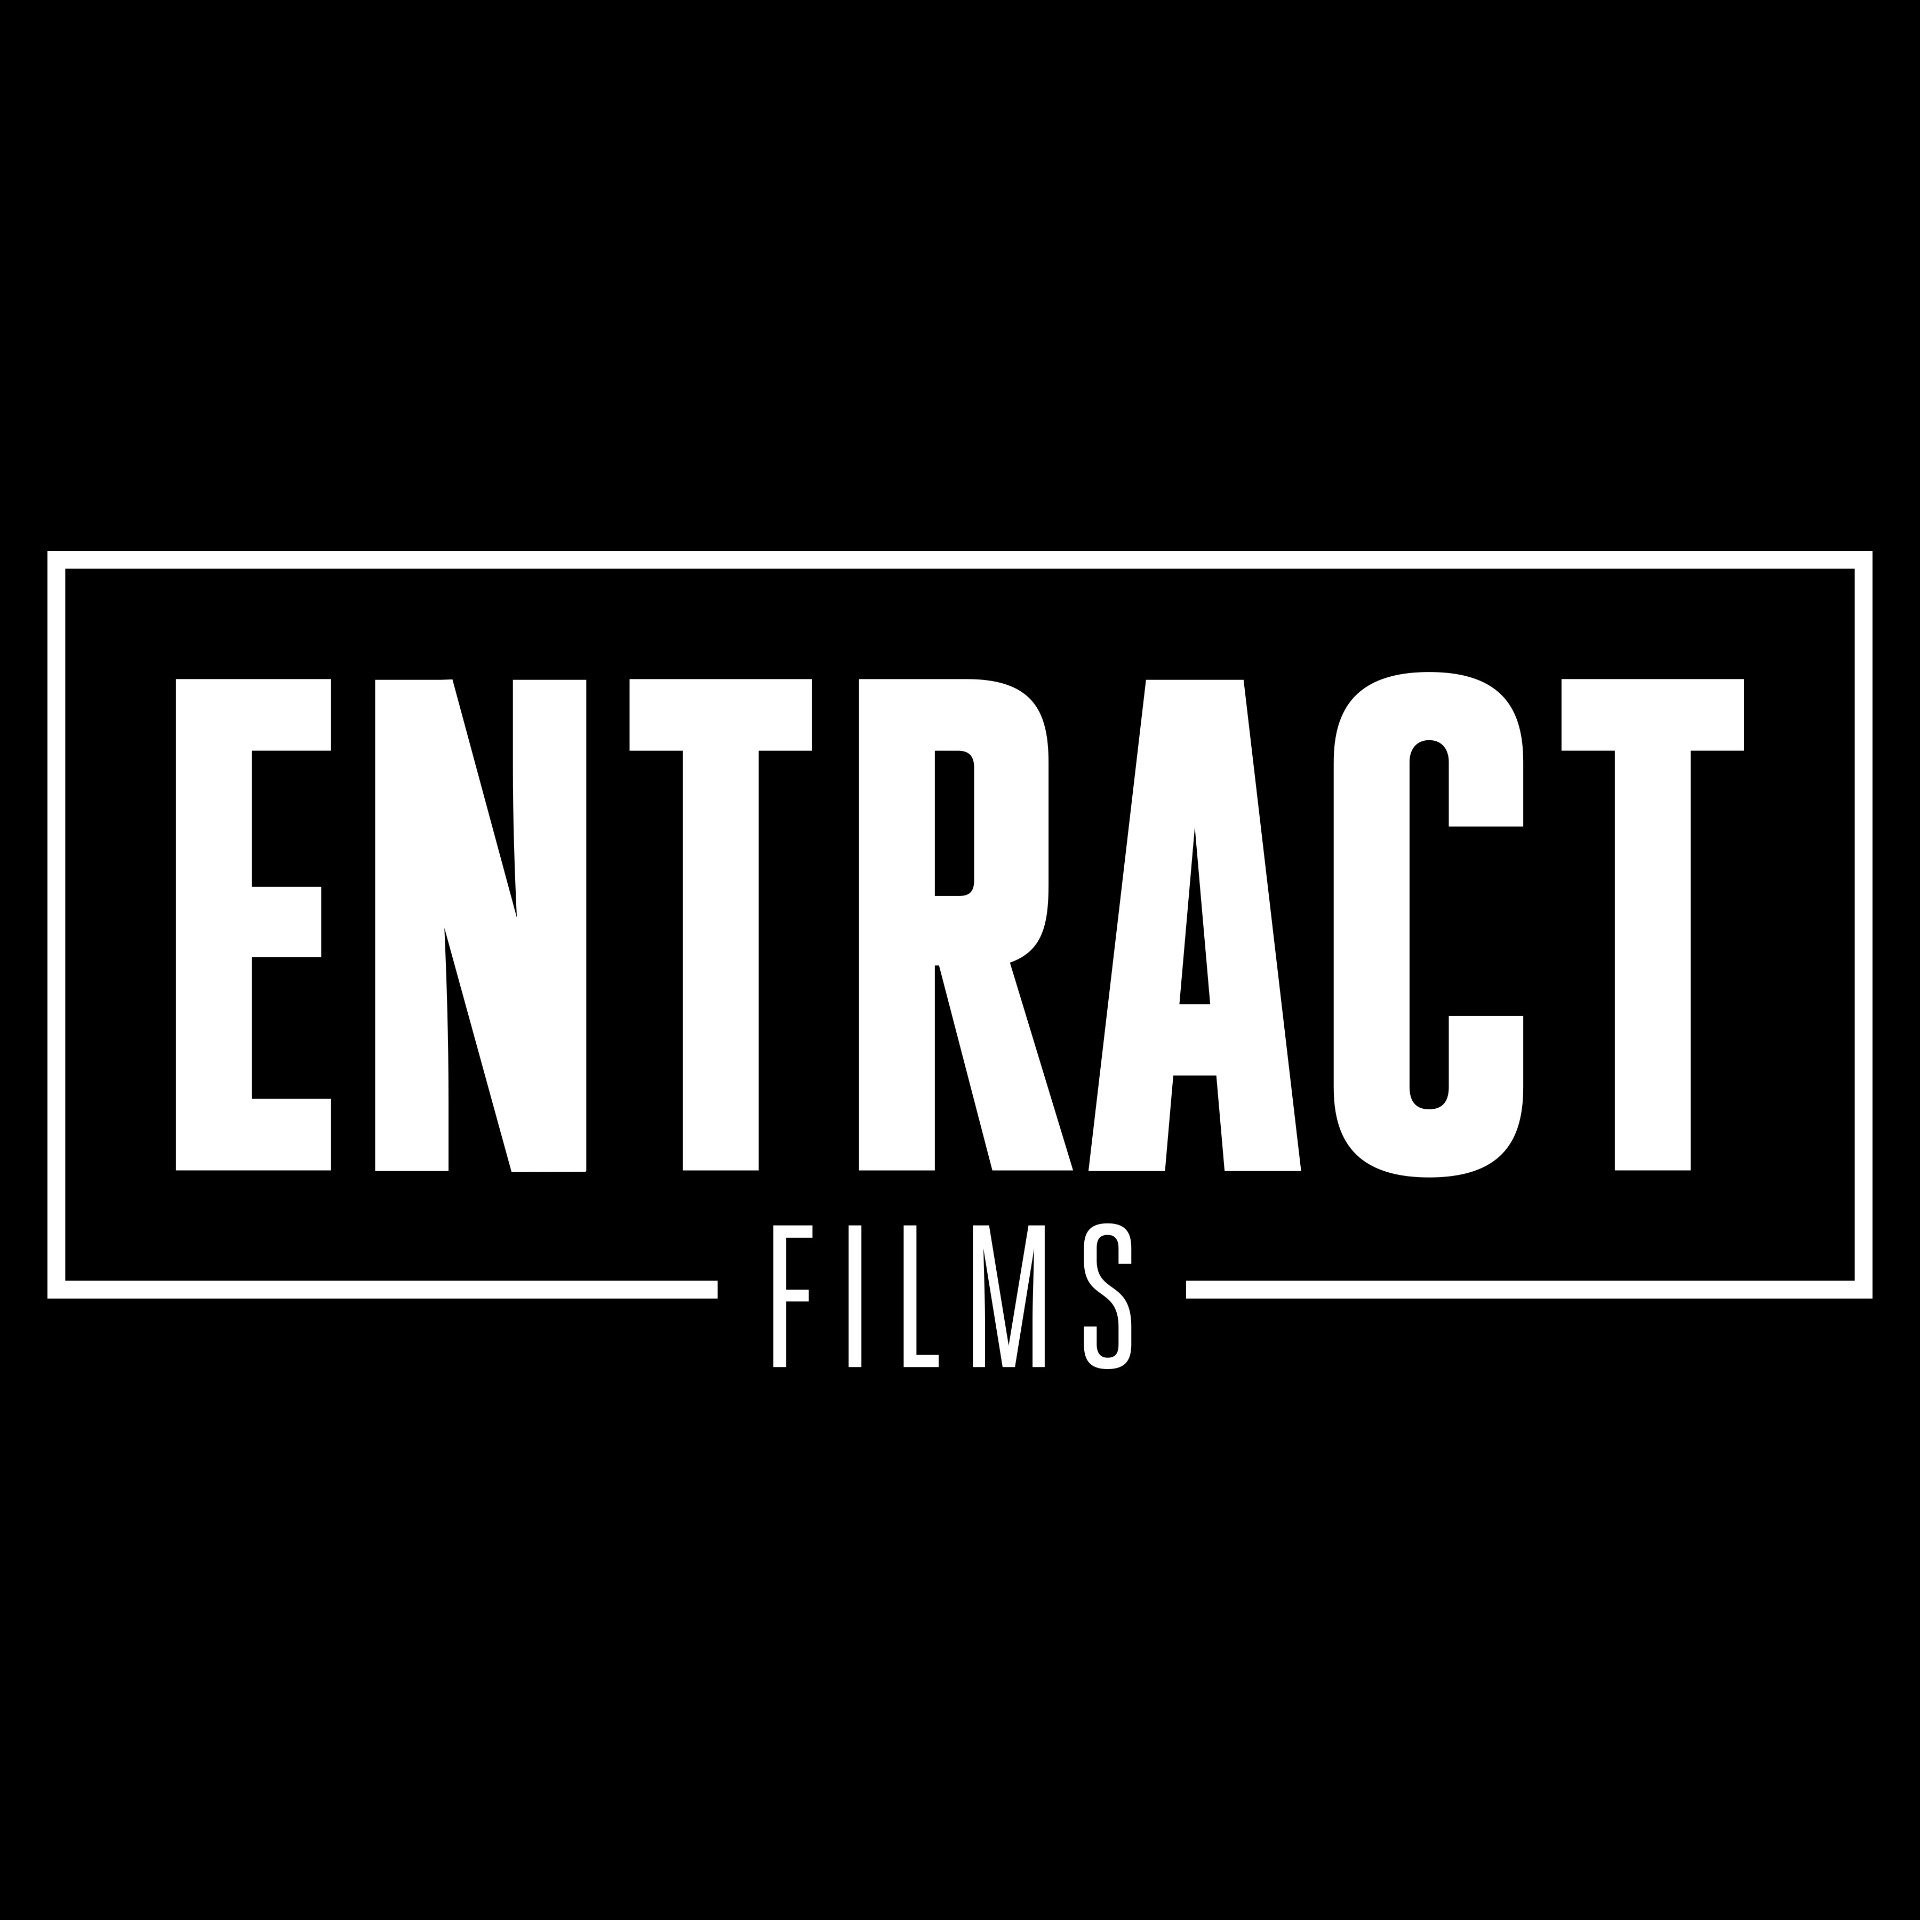 Entract Films